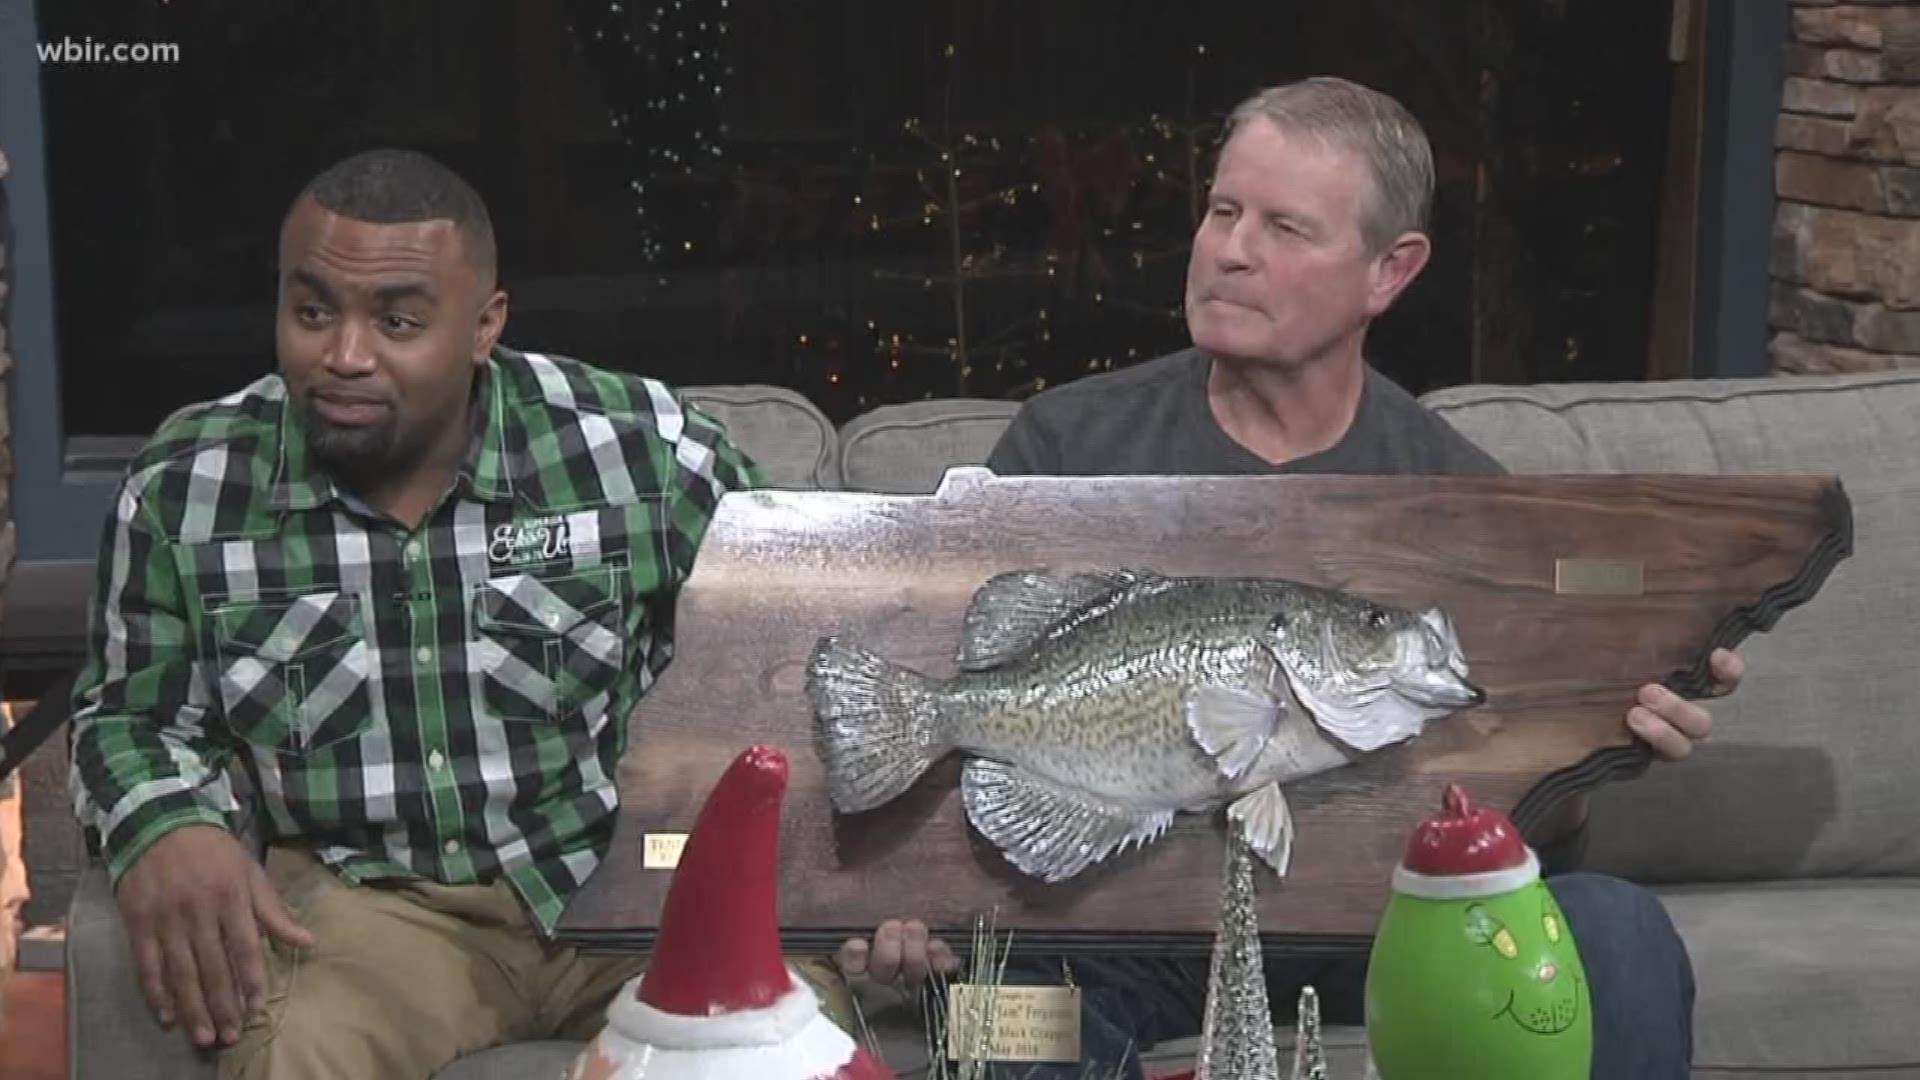 Lionel "Jam" Ferguson caught a world record crappie fish in May of 2018. After it was determined to be a world record catch at 5 lbs., 7 oz., he had it mounted by Fye Taxidermy who presented it to Jam today. Dec. 14, 2018-4pm